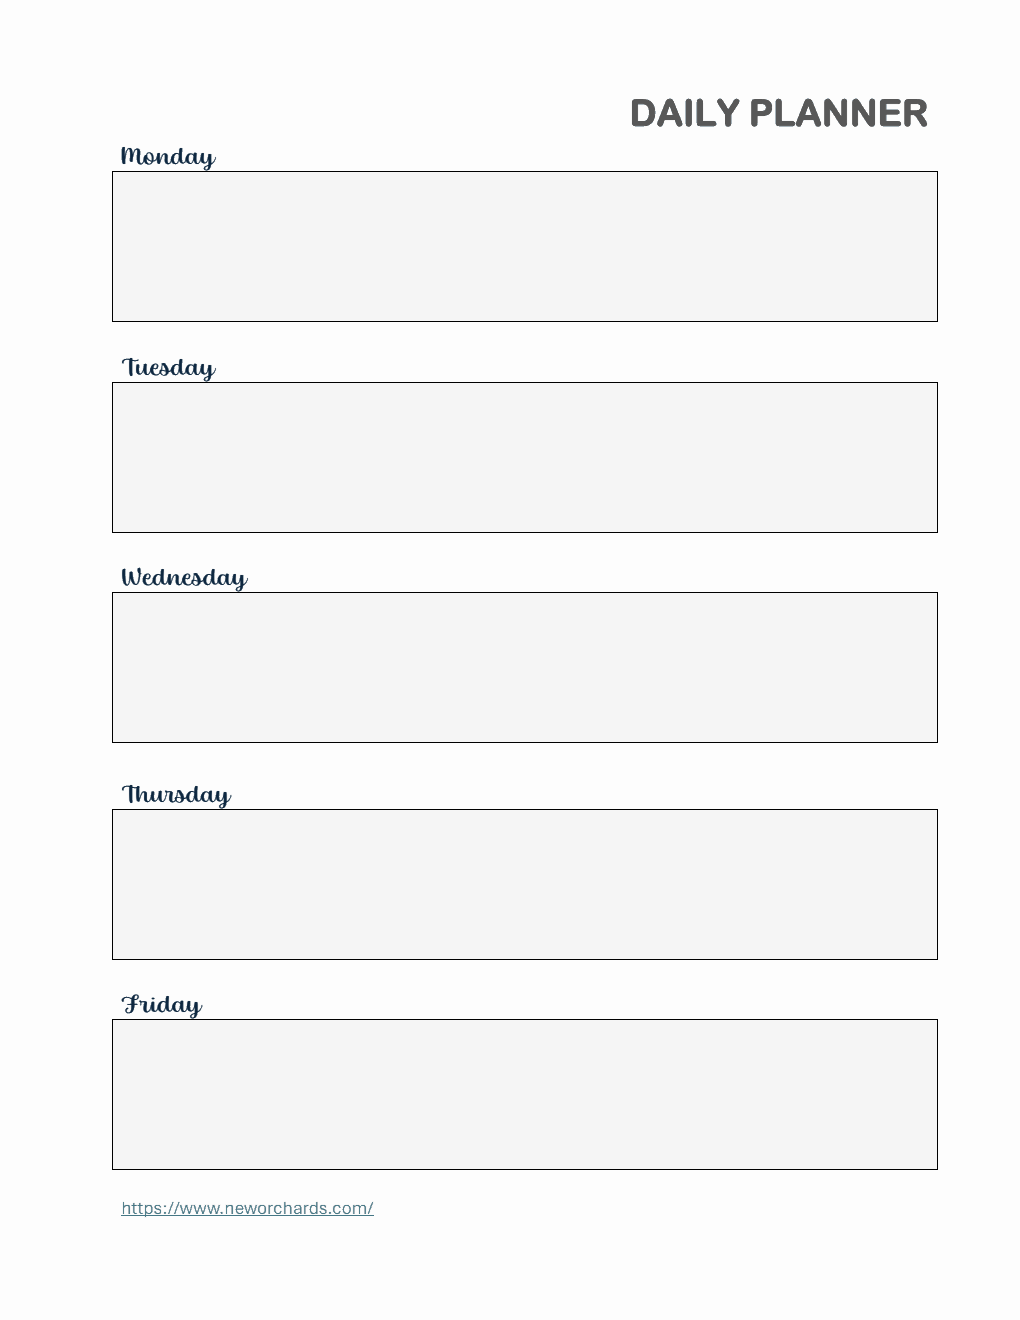 Daily Planner and Checklist Template in PDF (Printable)